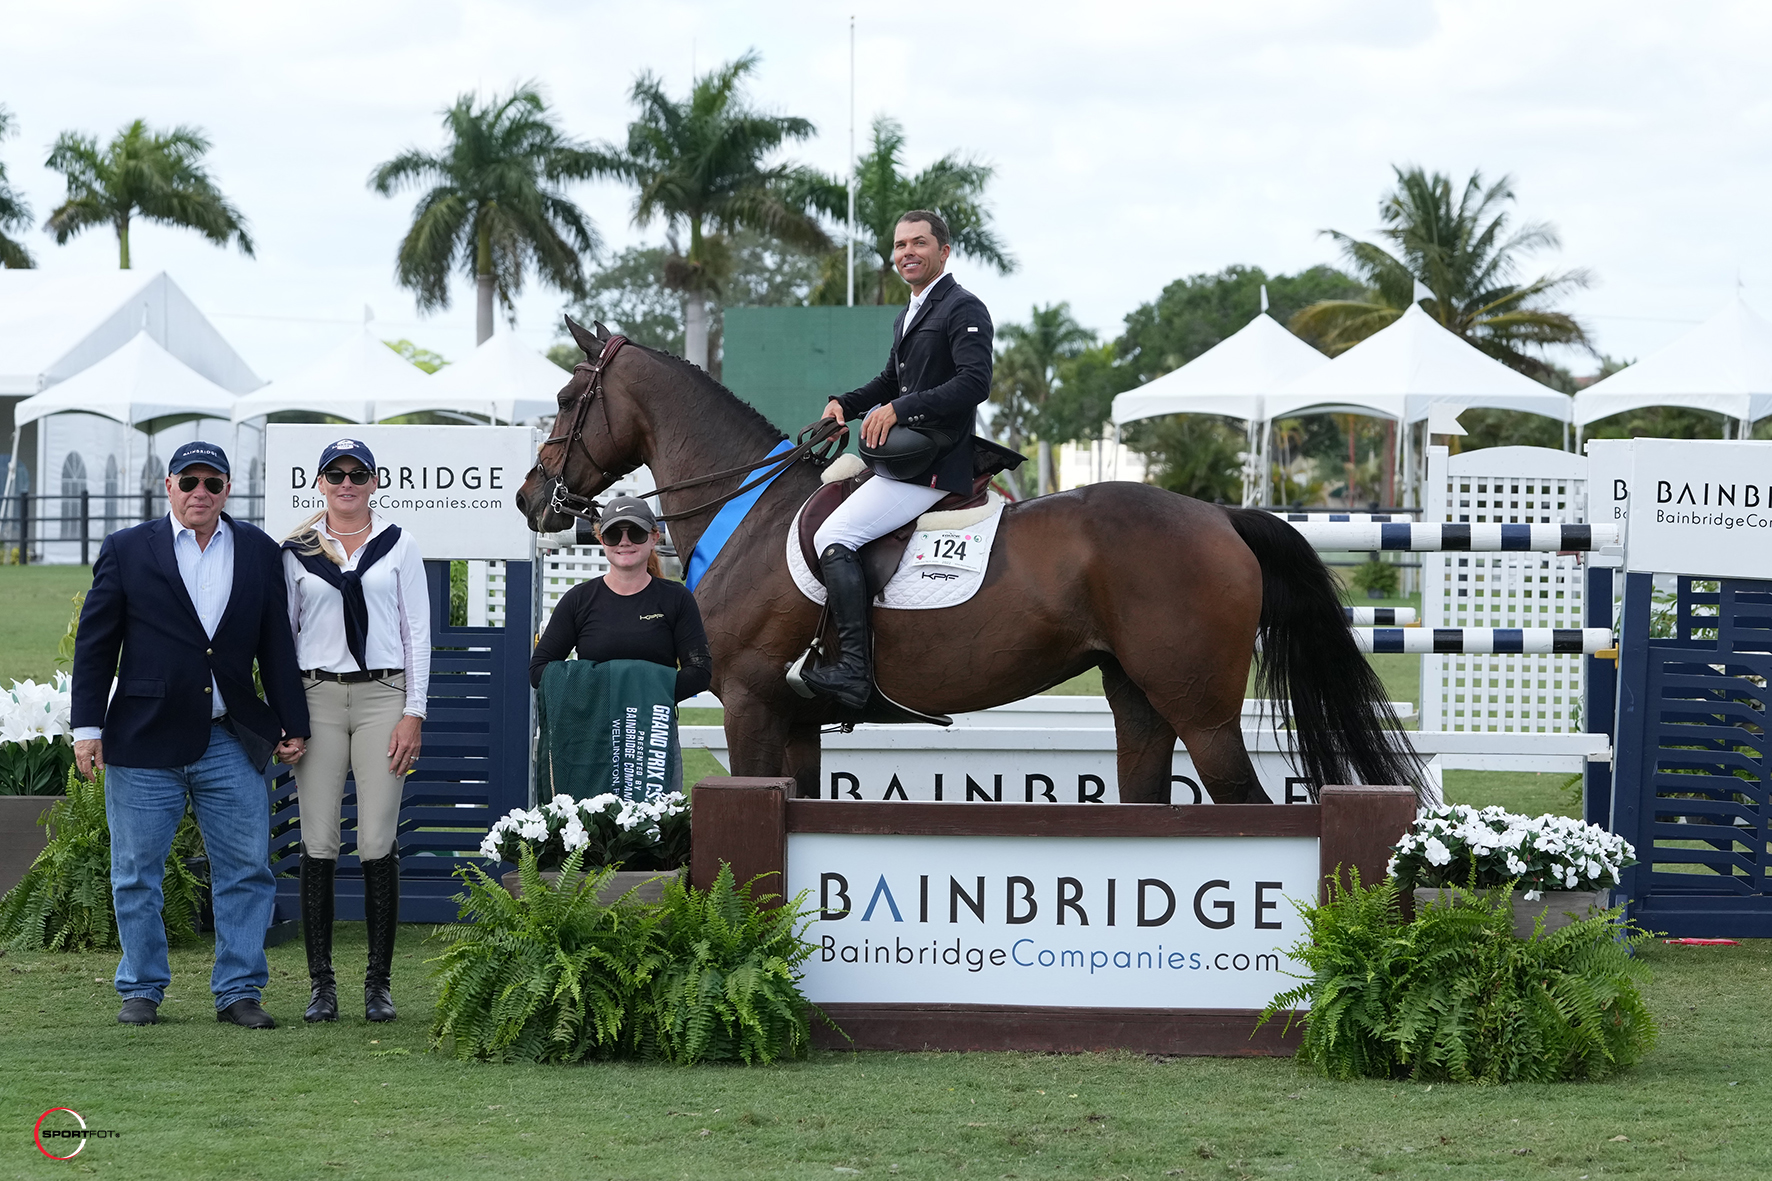 Kent Farrington and Orafina in their presentation ceremony. Pictured with Richard and Jennifer Schechter of Bainbridge Companies, as well as Mary Glier. ©Sportfot